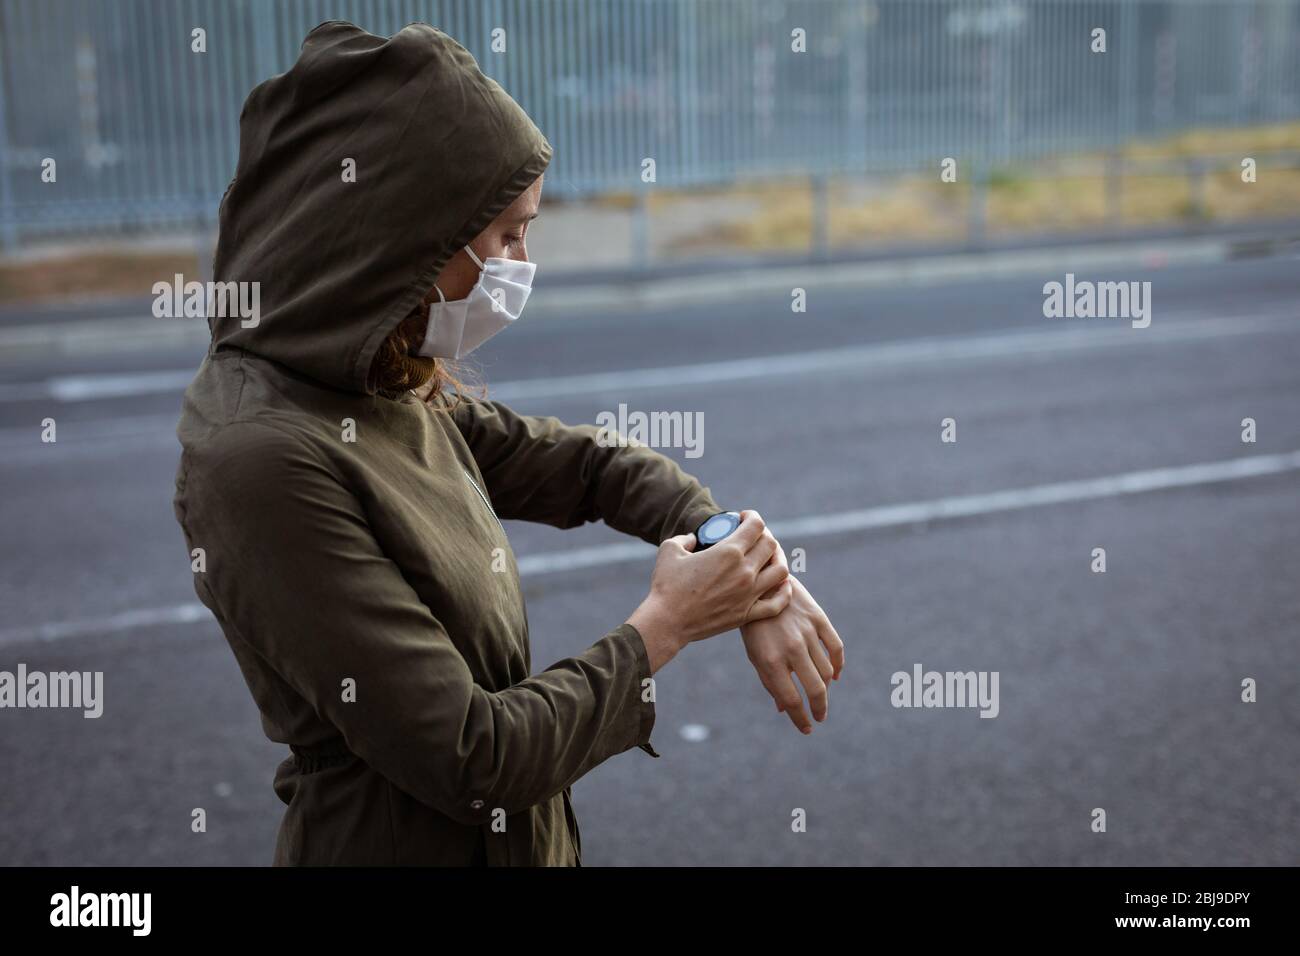 Caucasian woman wearing a protective mask and checking her watch in the streets Stock Photo